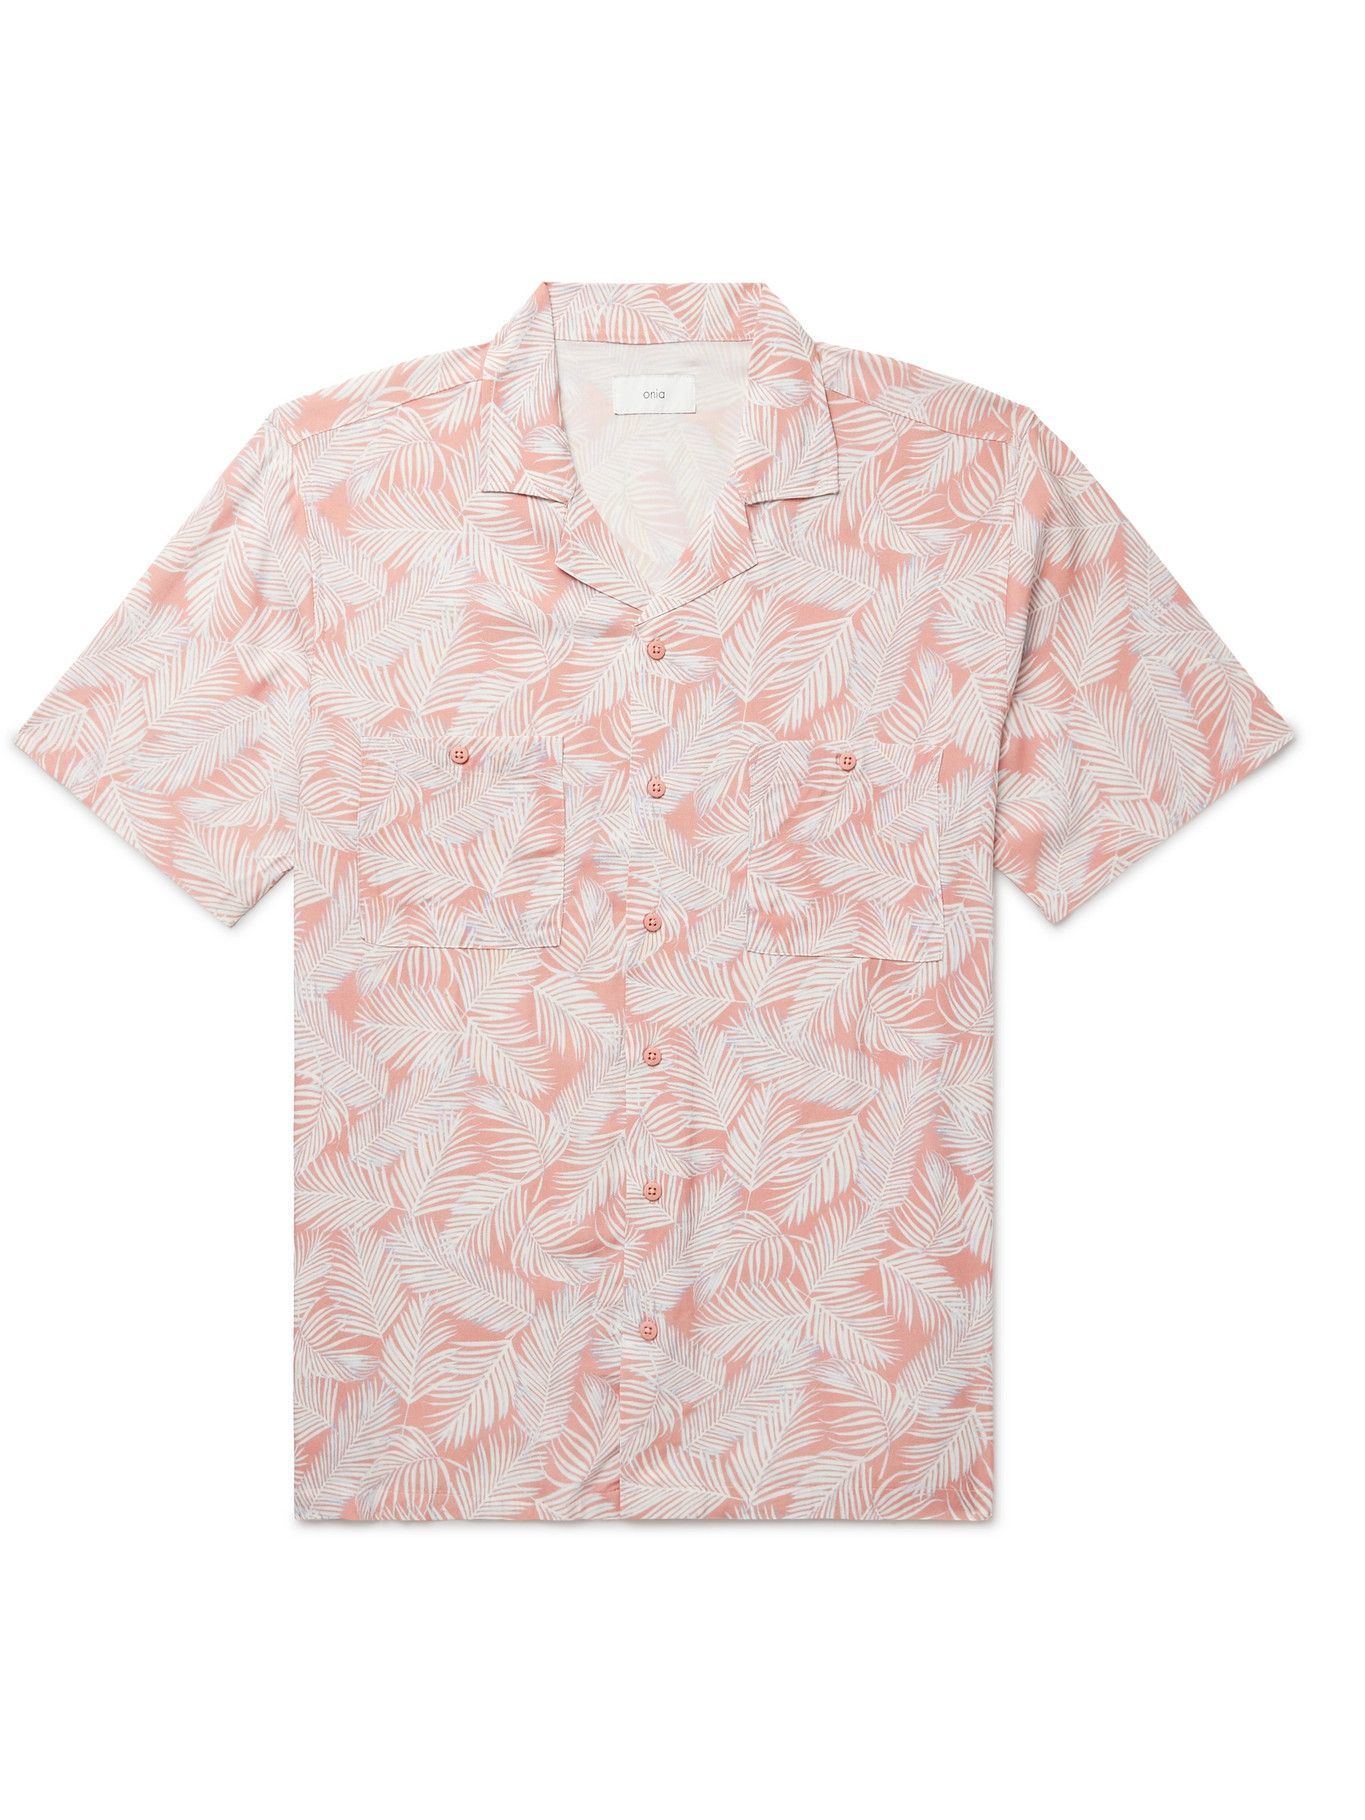 Onia - Vacation Camp-Collar Printed Voile Shirt - Pink Onia